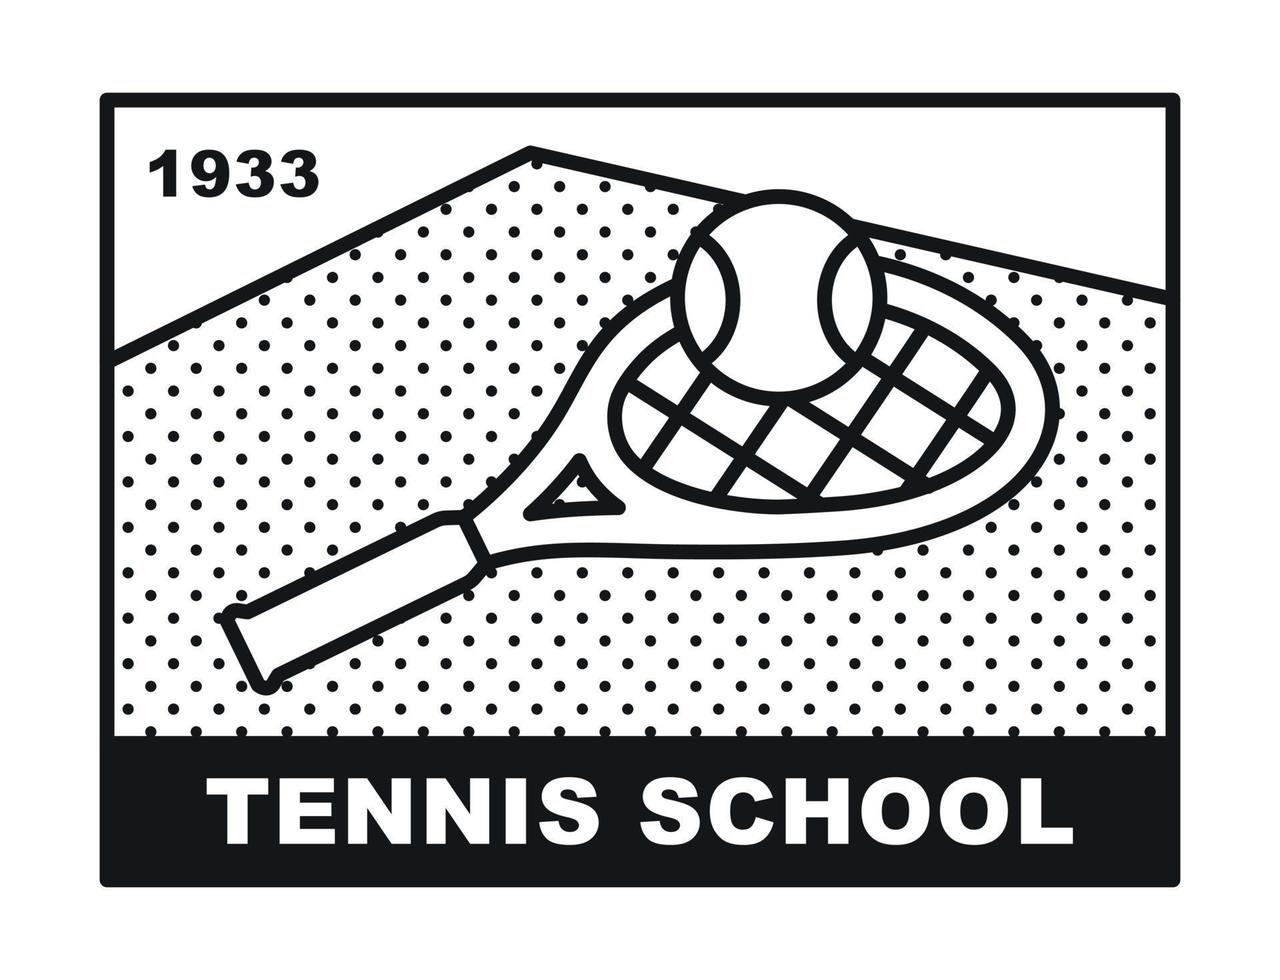 Tennis club logo. A racket and a ball are placed on the tennis court. vector